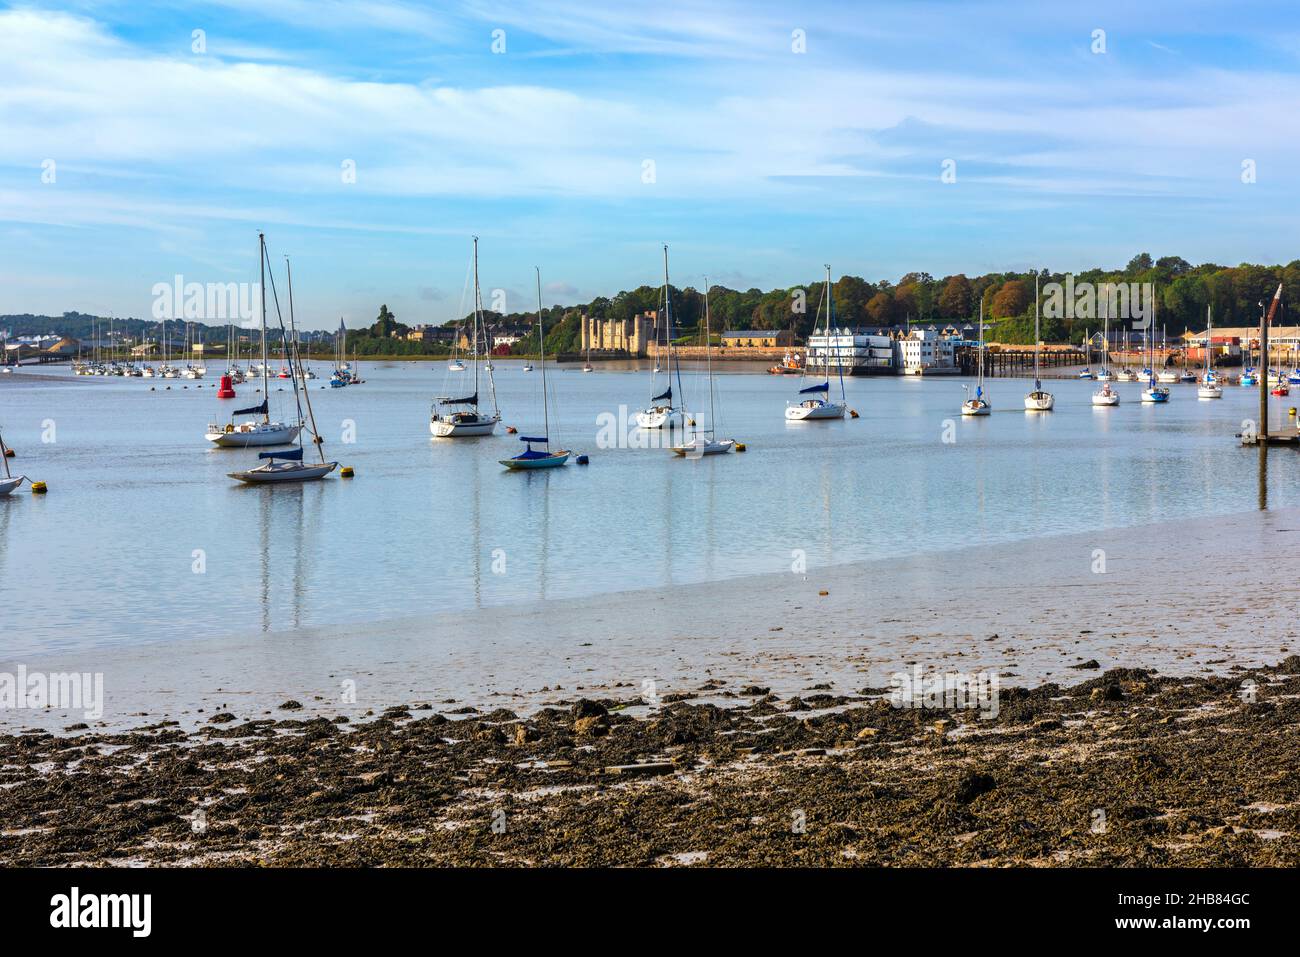 Upnor near Rochester & the Medway Estuary in Kent, England. Upnor castle can be seen in the distance Stock Photo